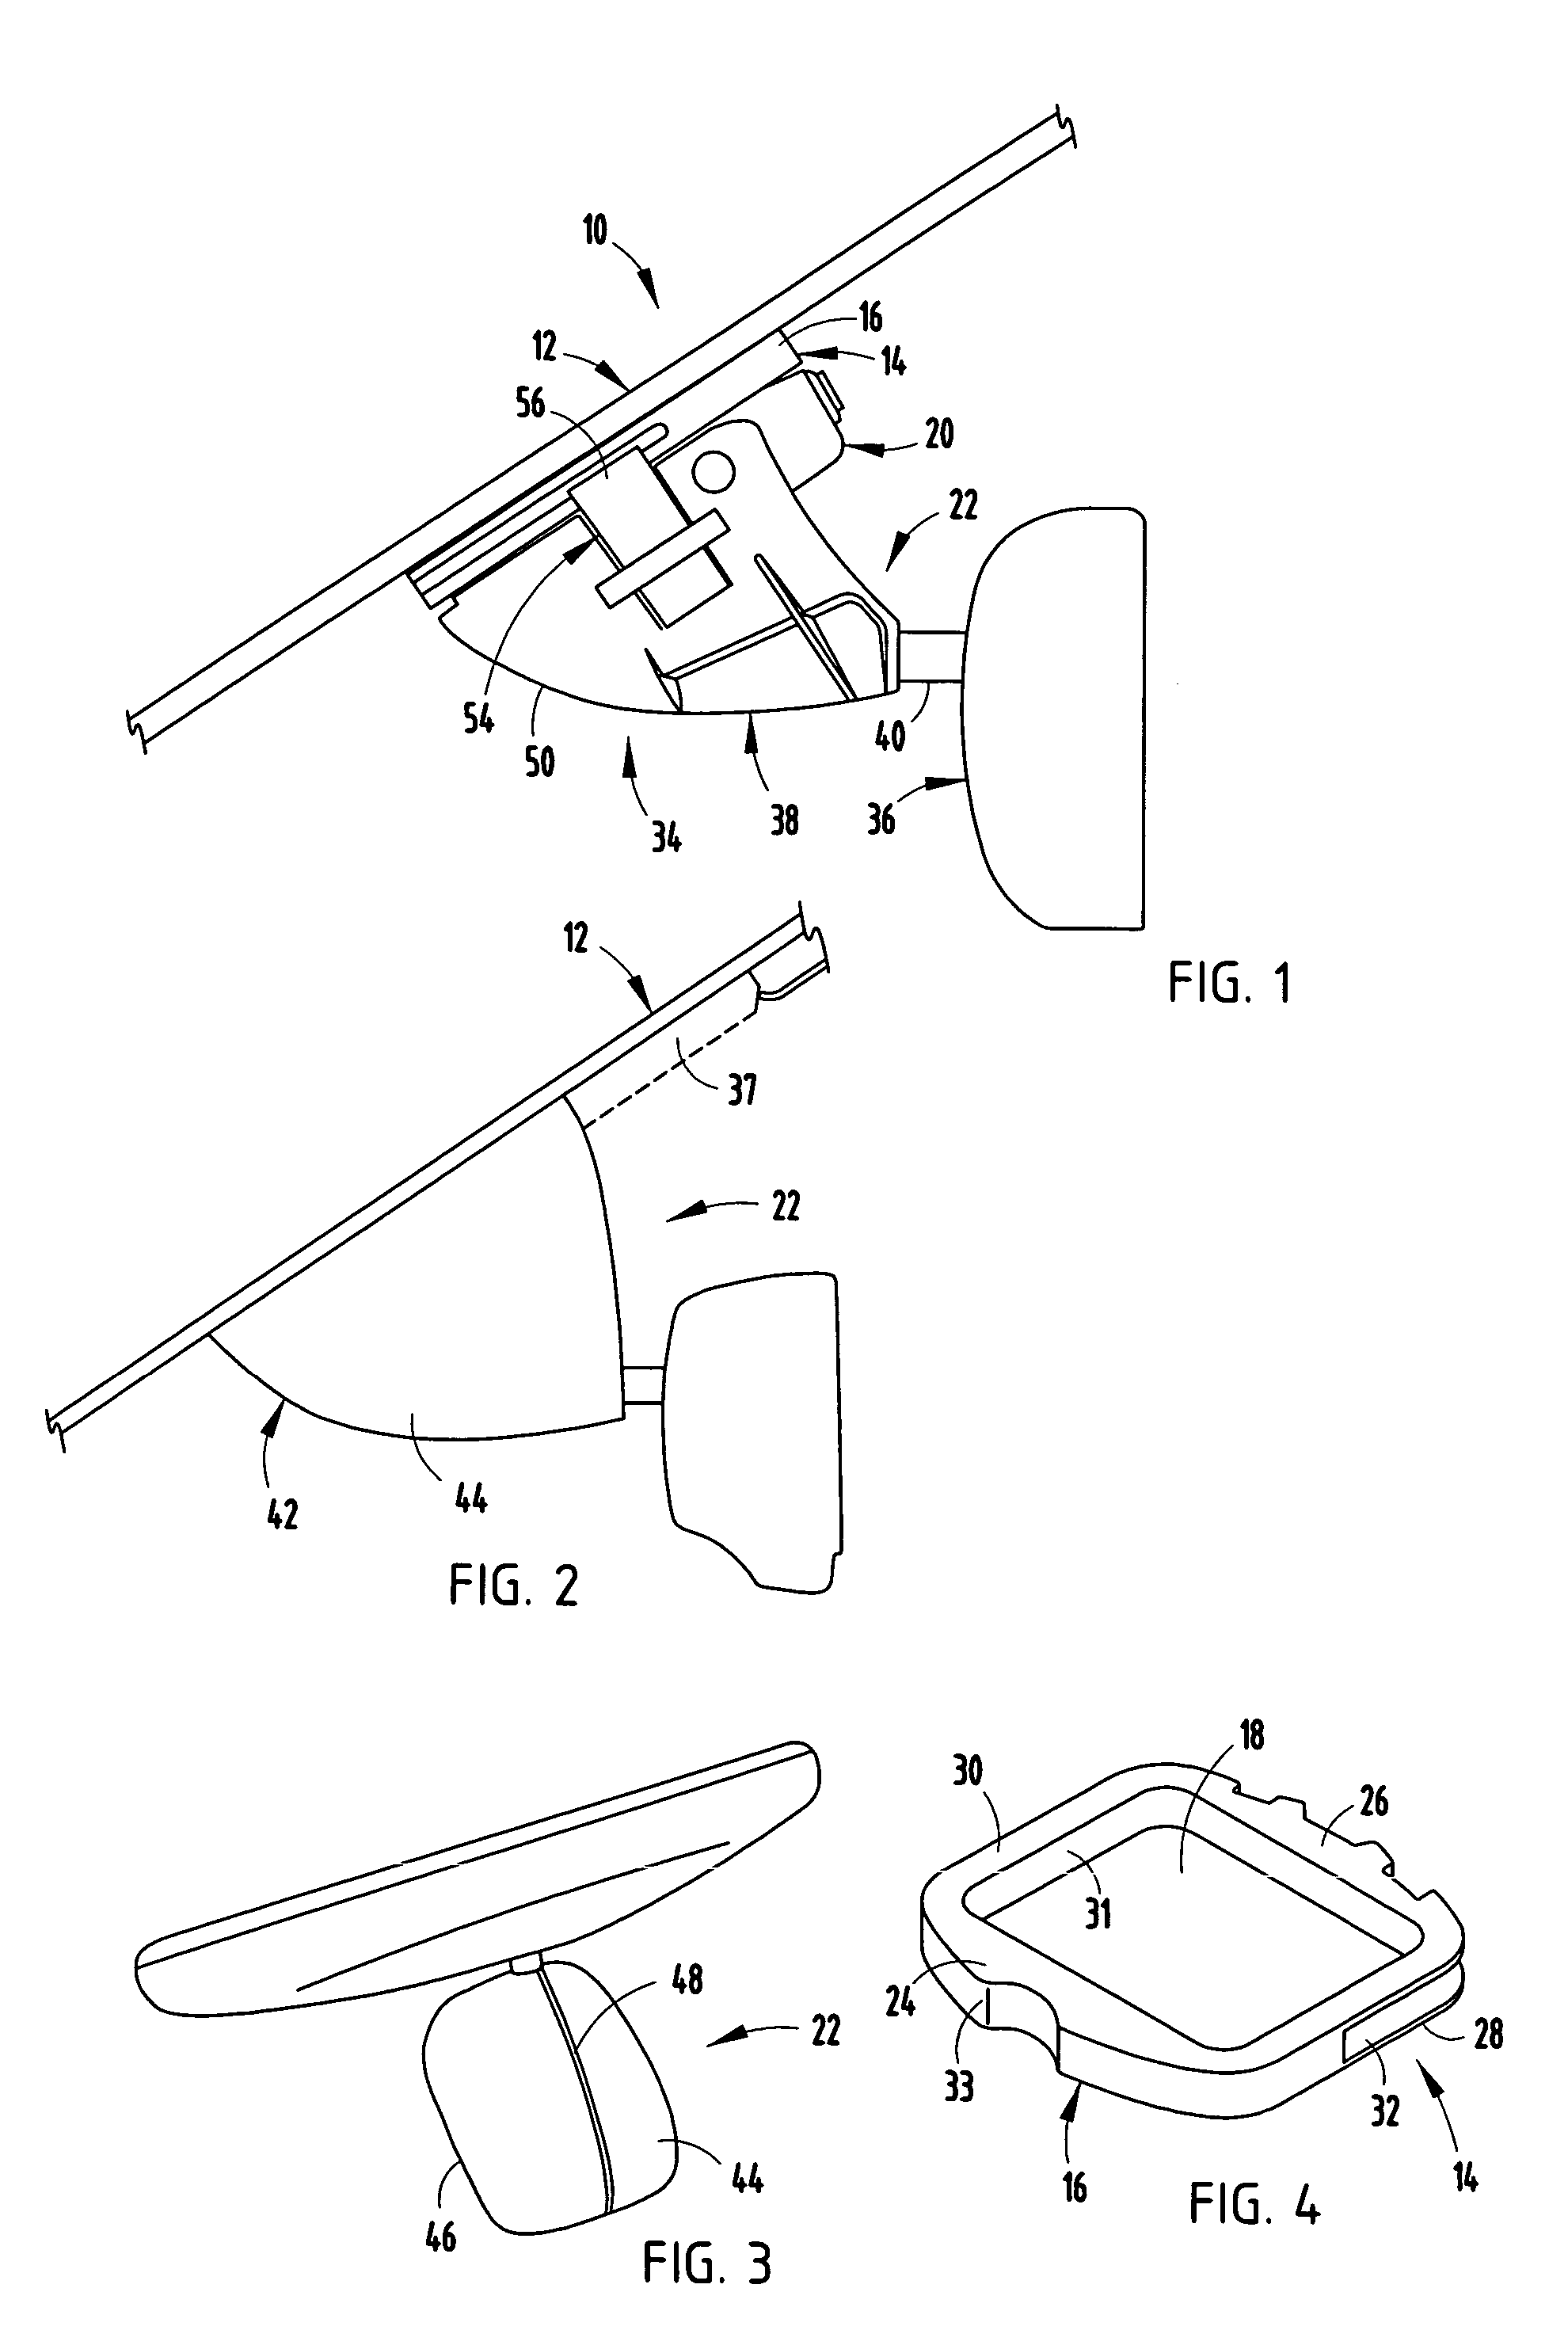 Rearview mirror system for accommodating a rain sensor